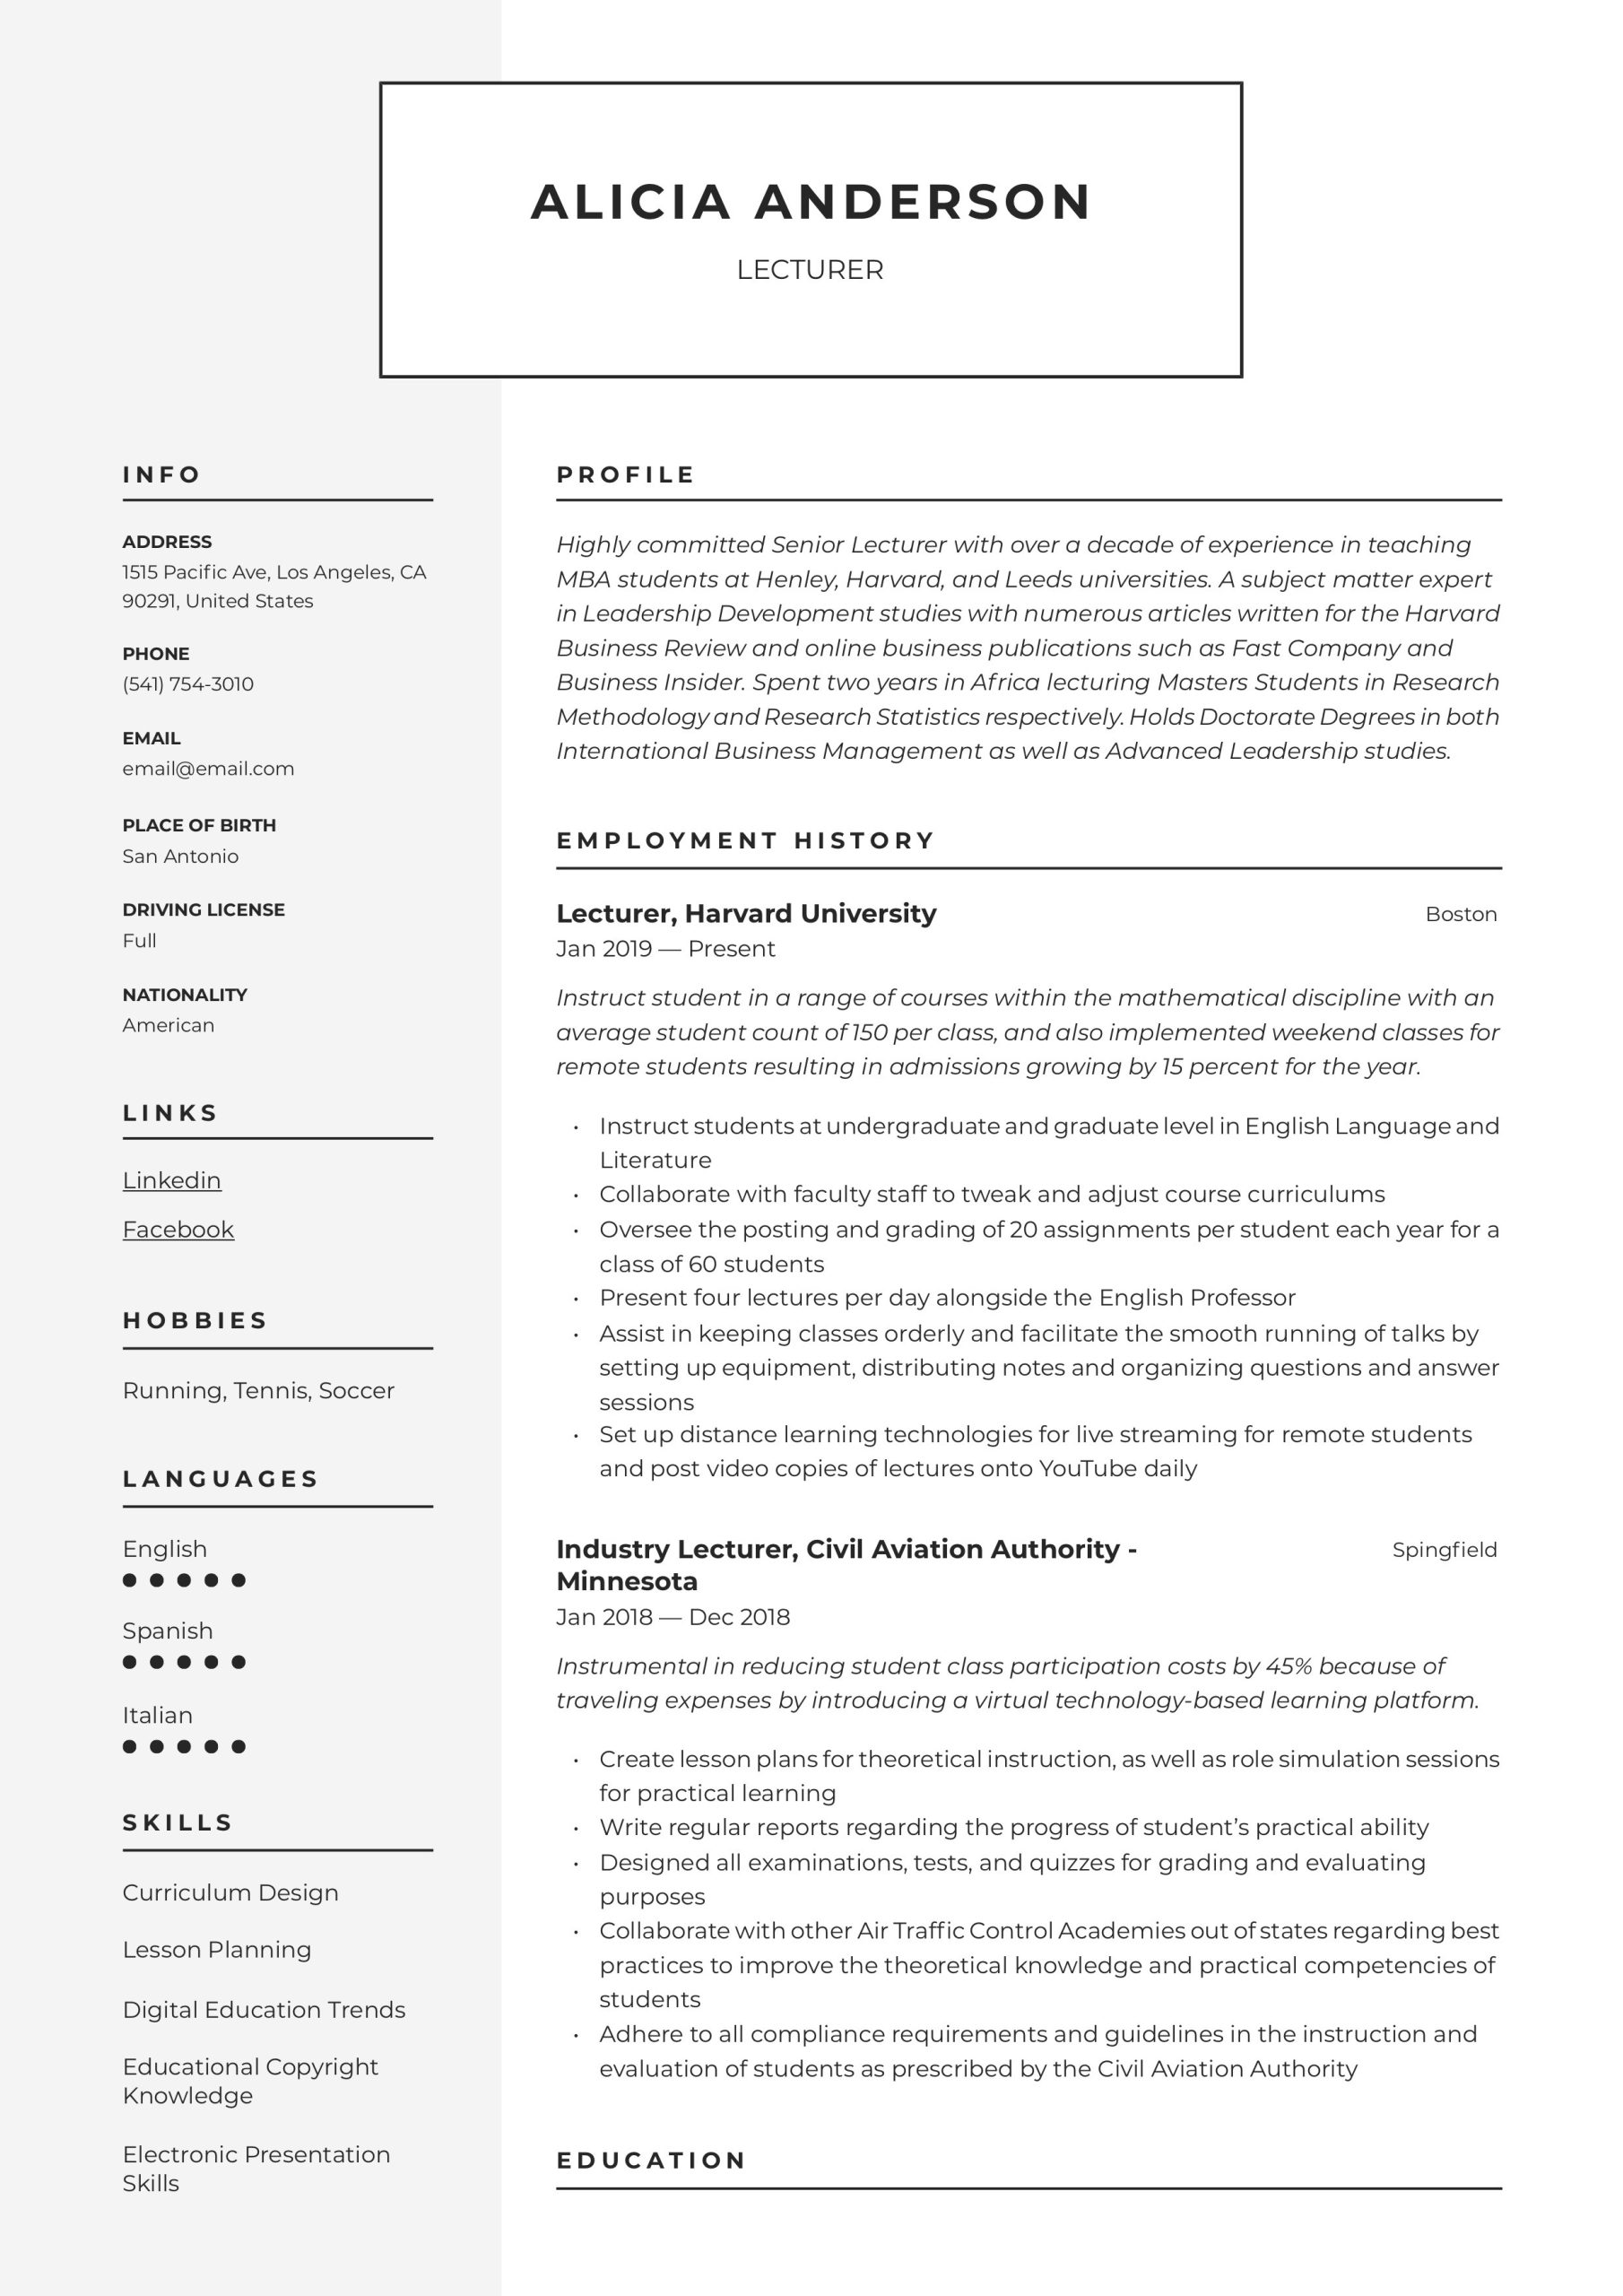 Sample Resume for Professors In Universities Lecturer Resume & Writing Guide  18 Free Examples 2020